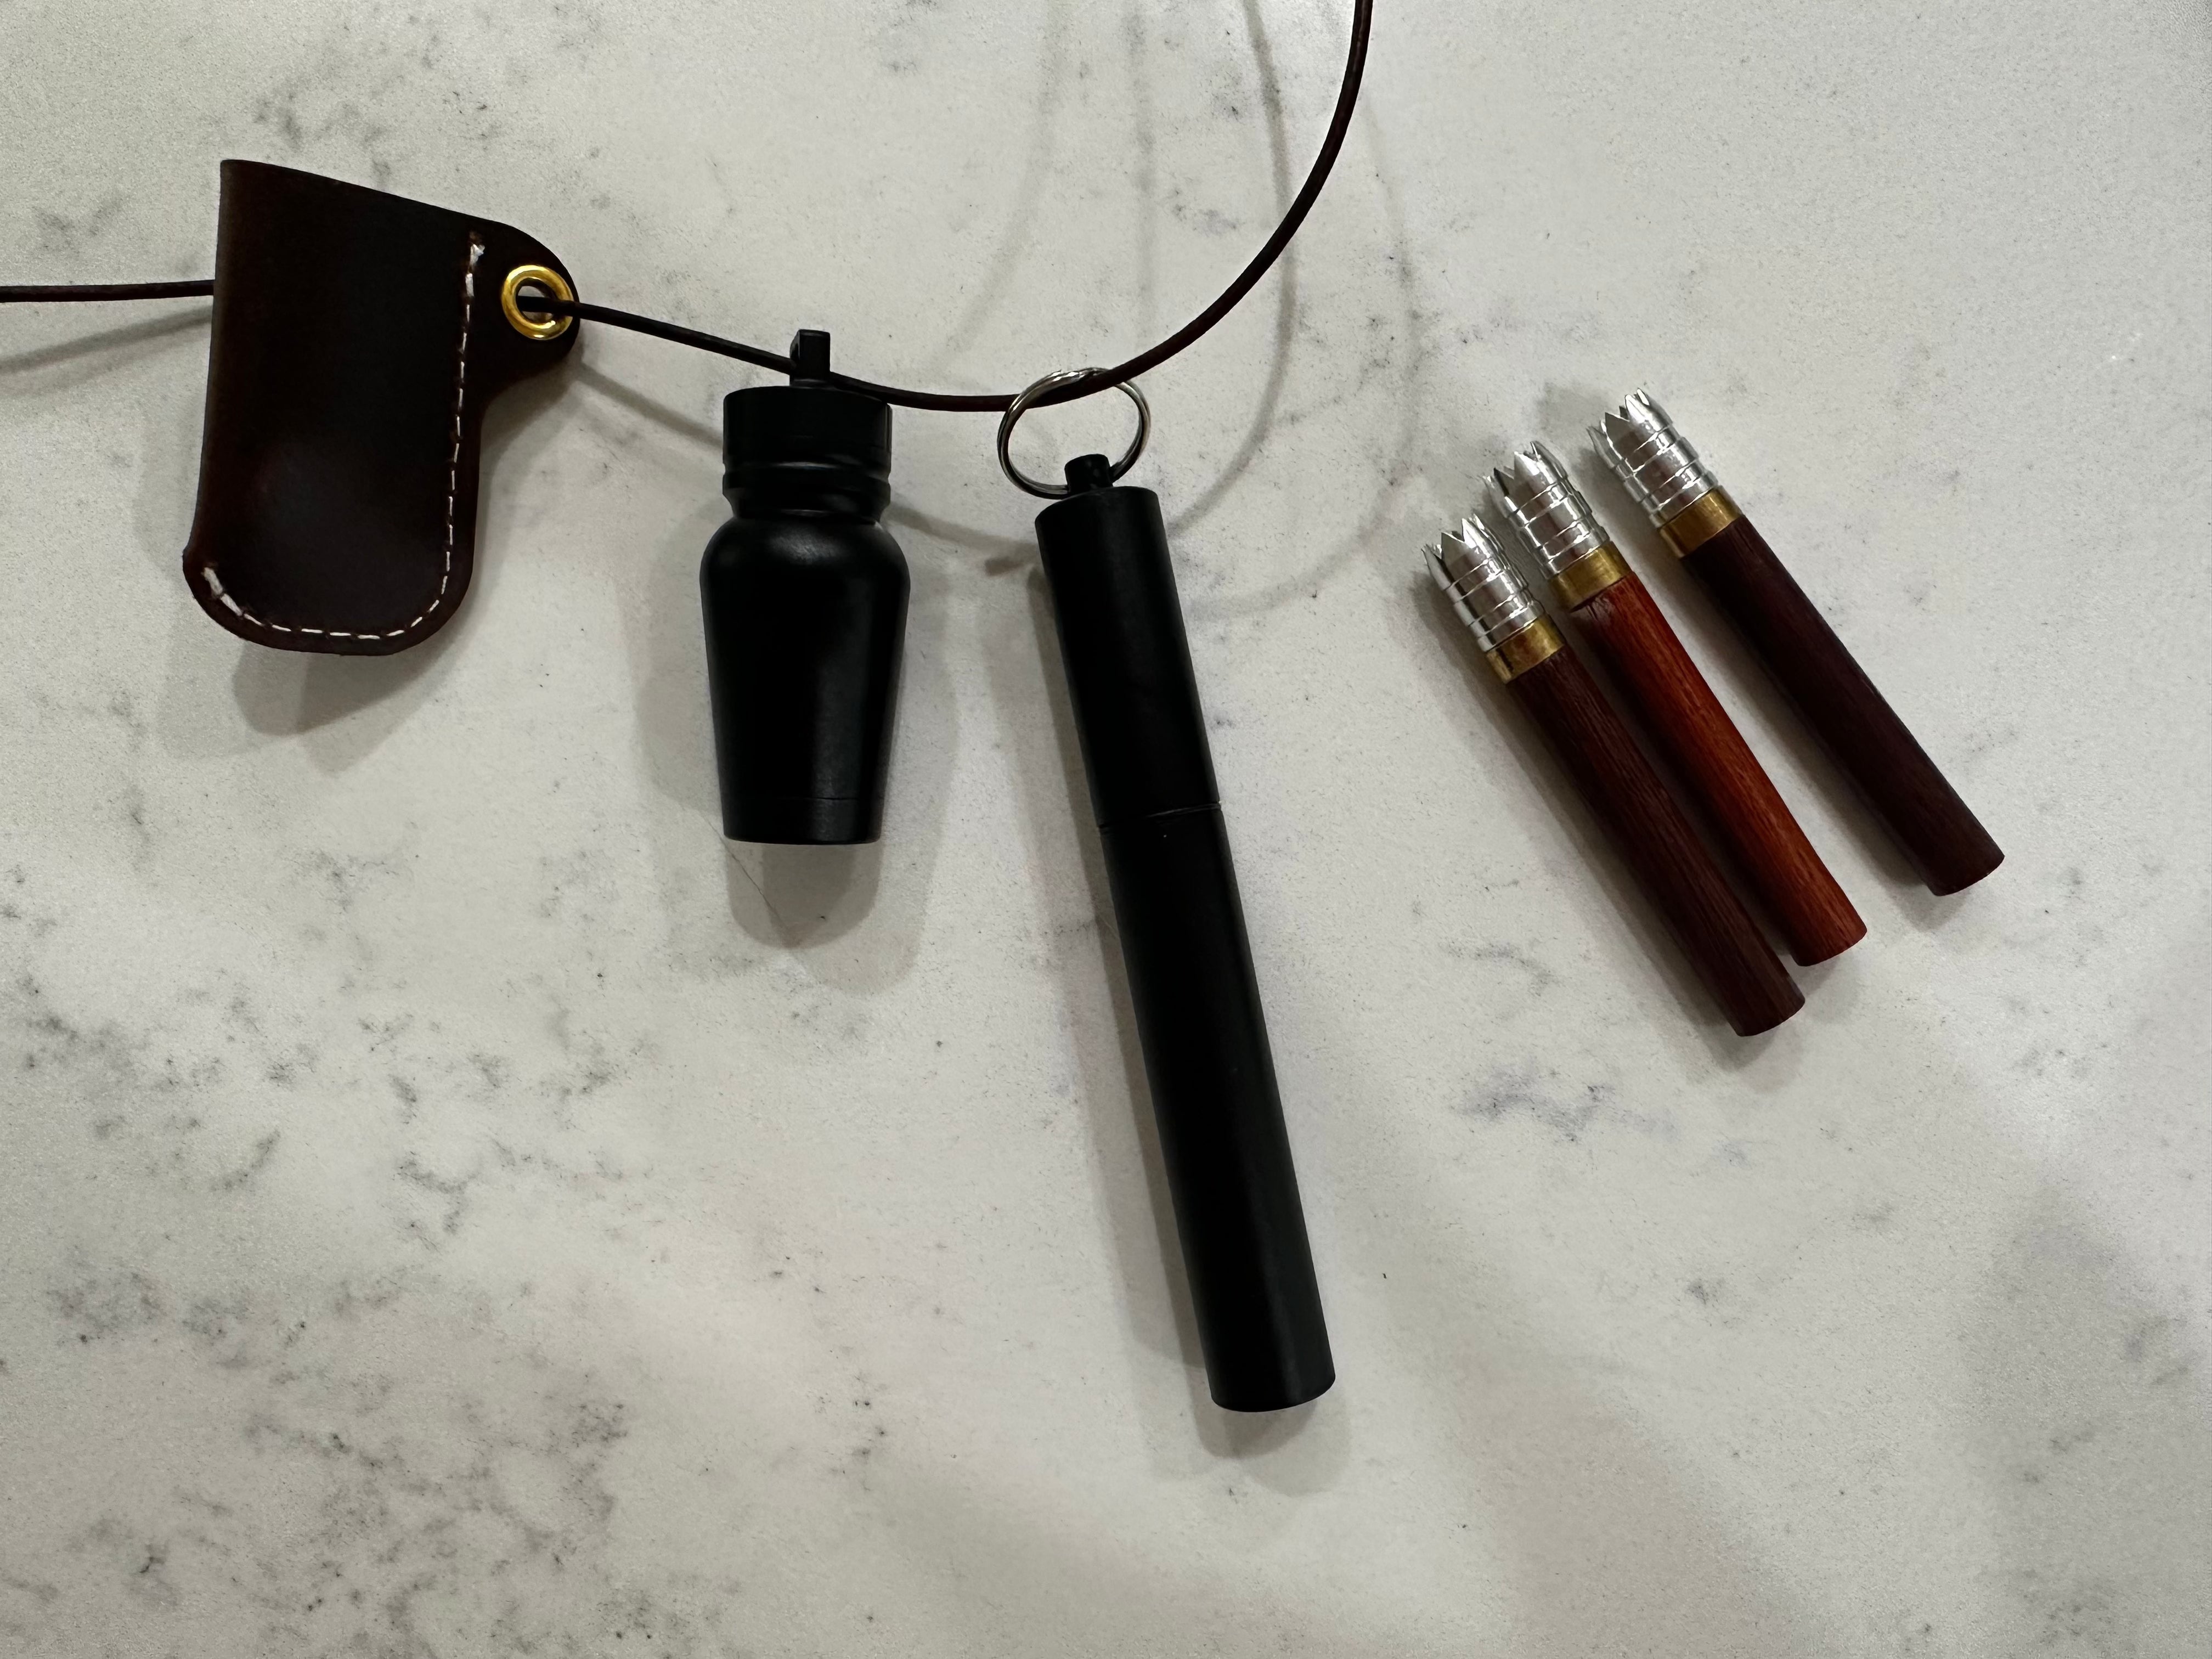 Custom wooden one hitter dugout, chillum, festival special stash jar and leather neck pouch set.